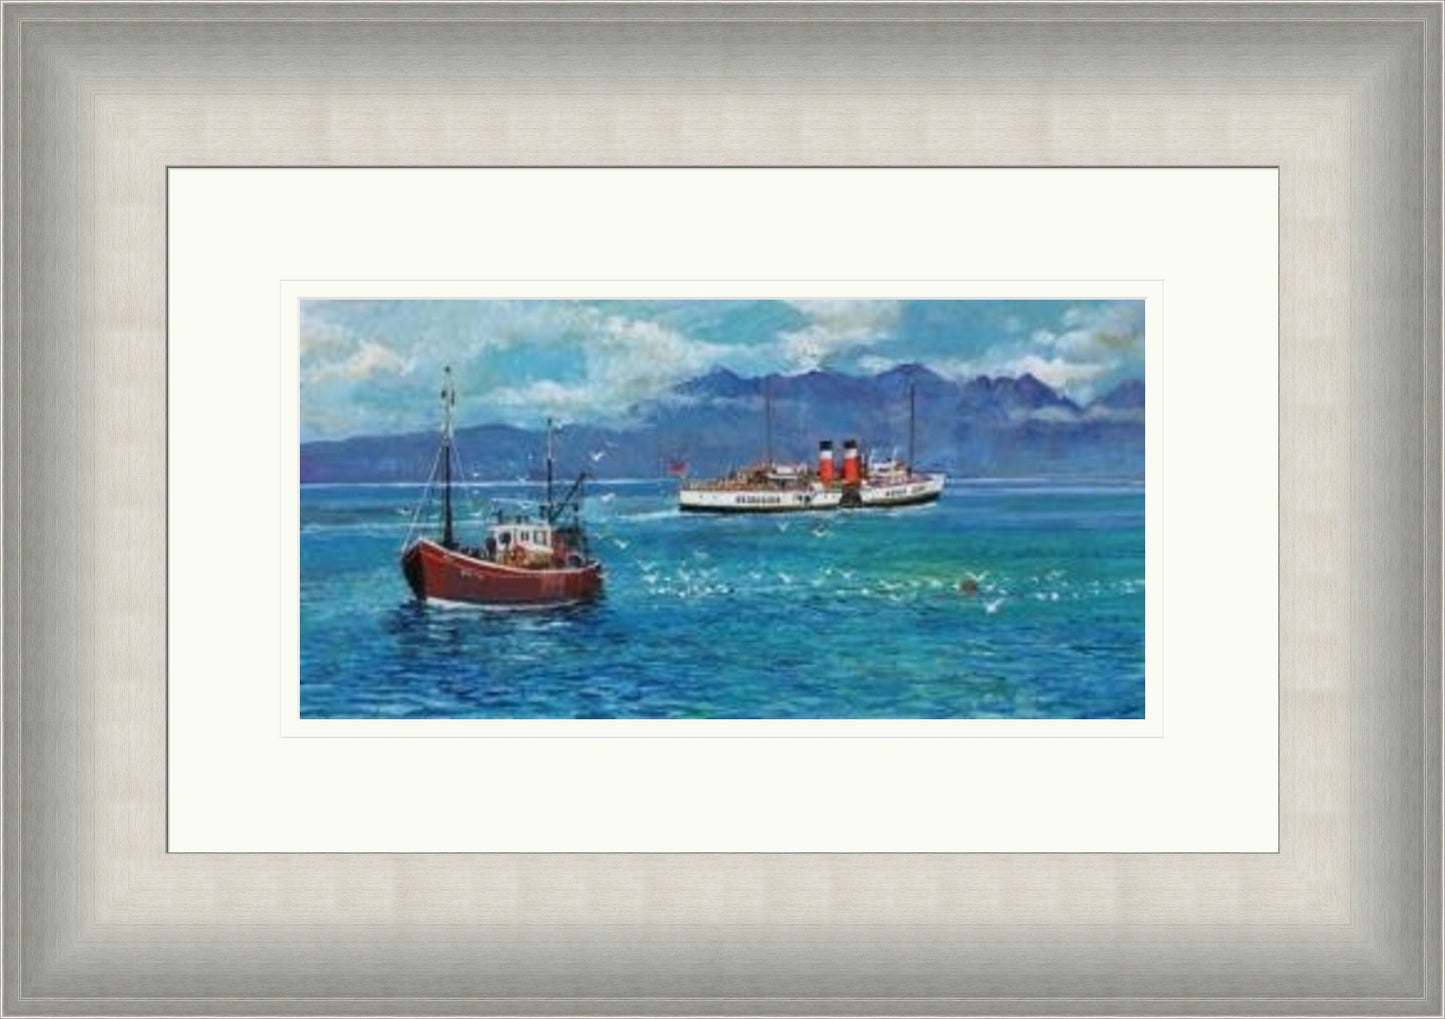 The Waverley and Fishing Boat by Bob Lees